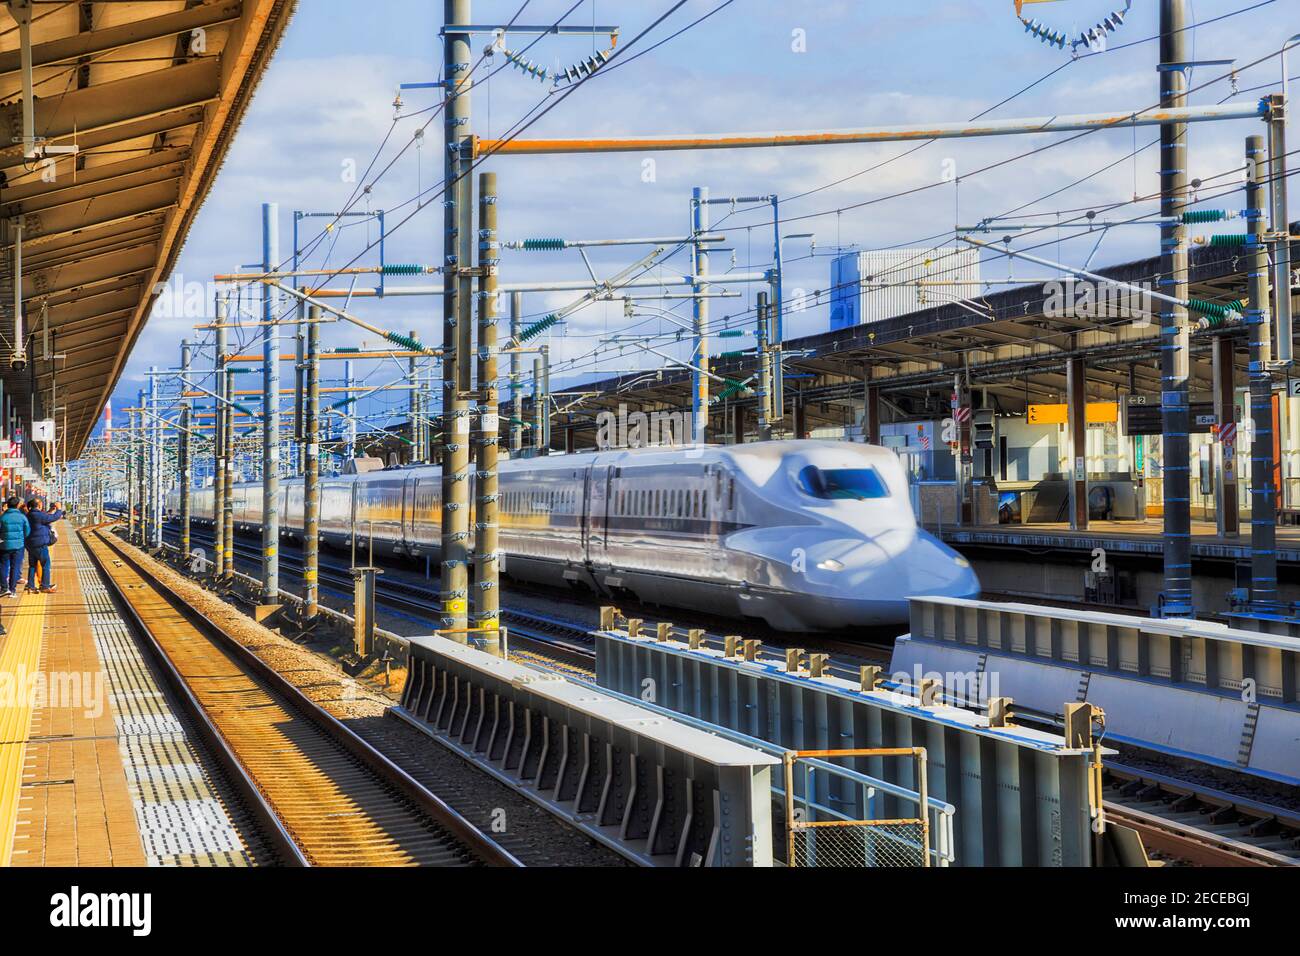 Express train passing railway station platforms in Shin-Fuji city of Japan on a sunny day. Stock Photo